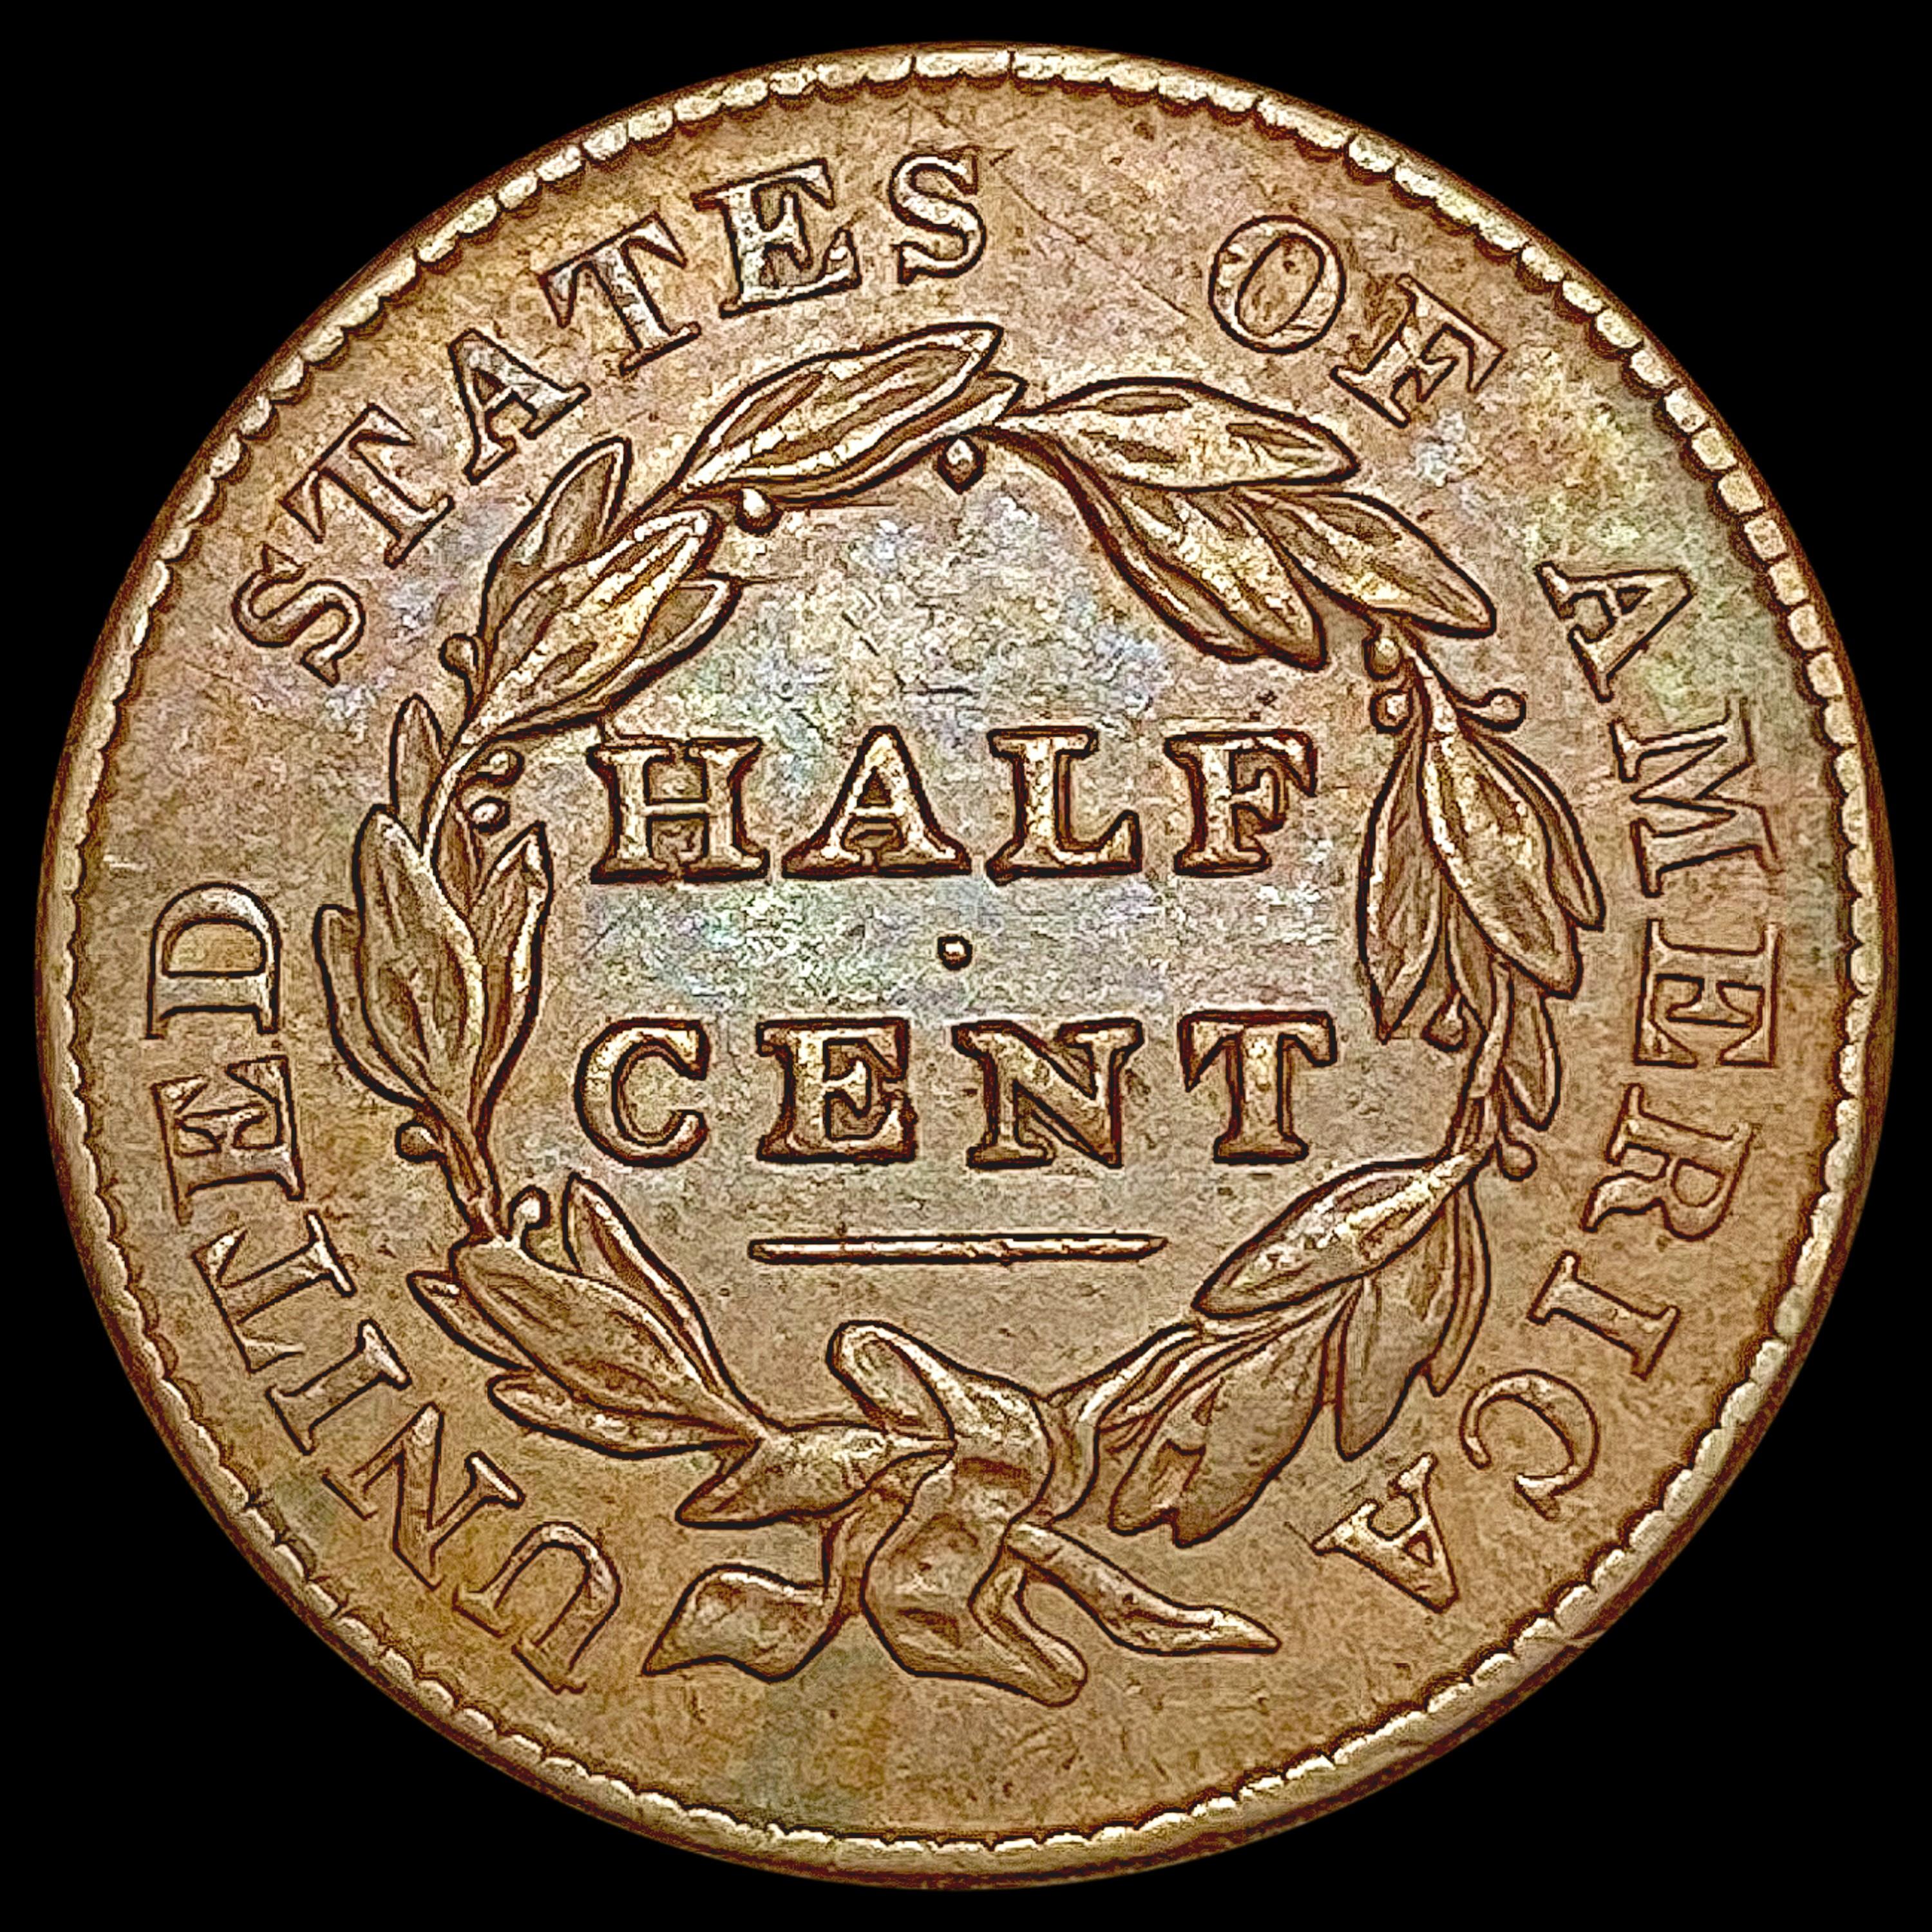 1828 Classic Head Half Cent CLOSELY UNCIRCULATED